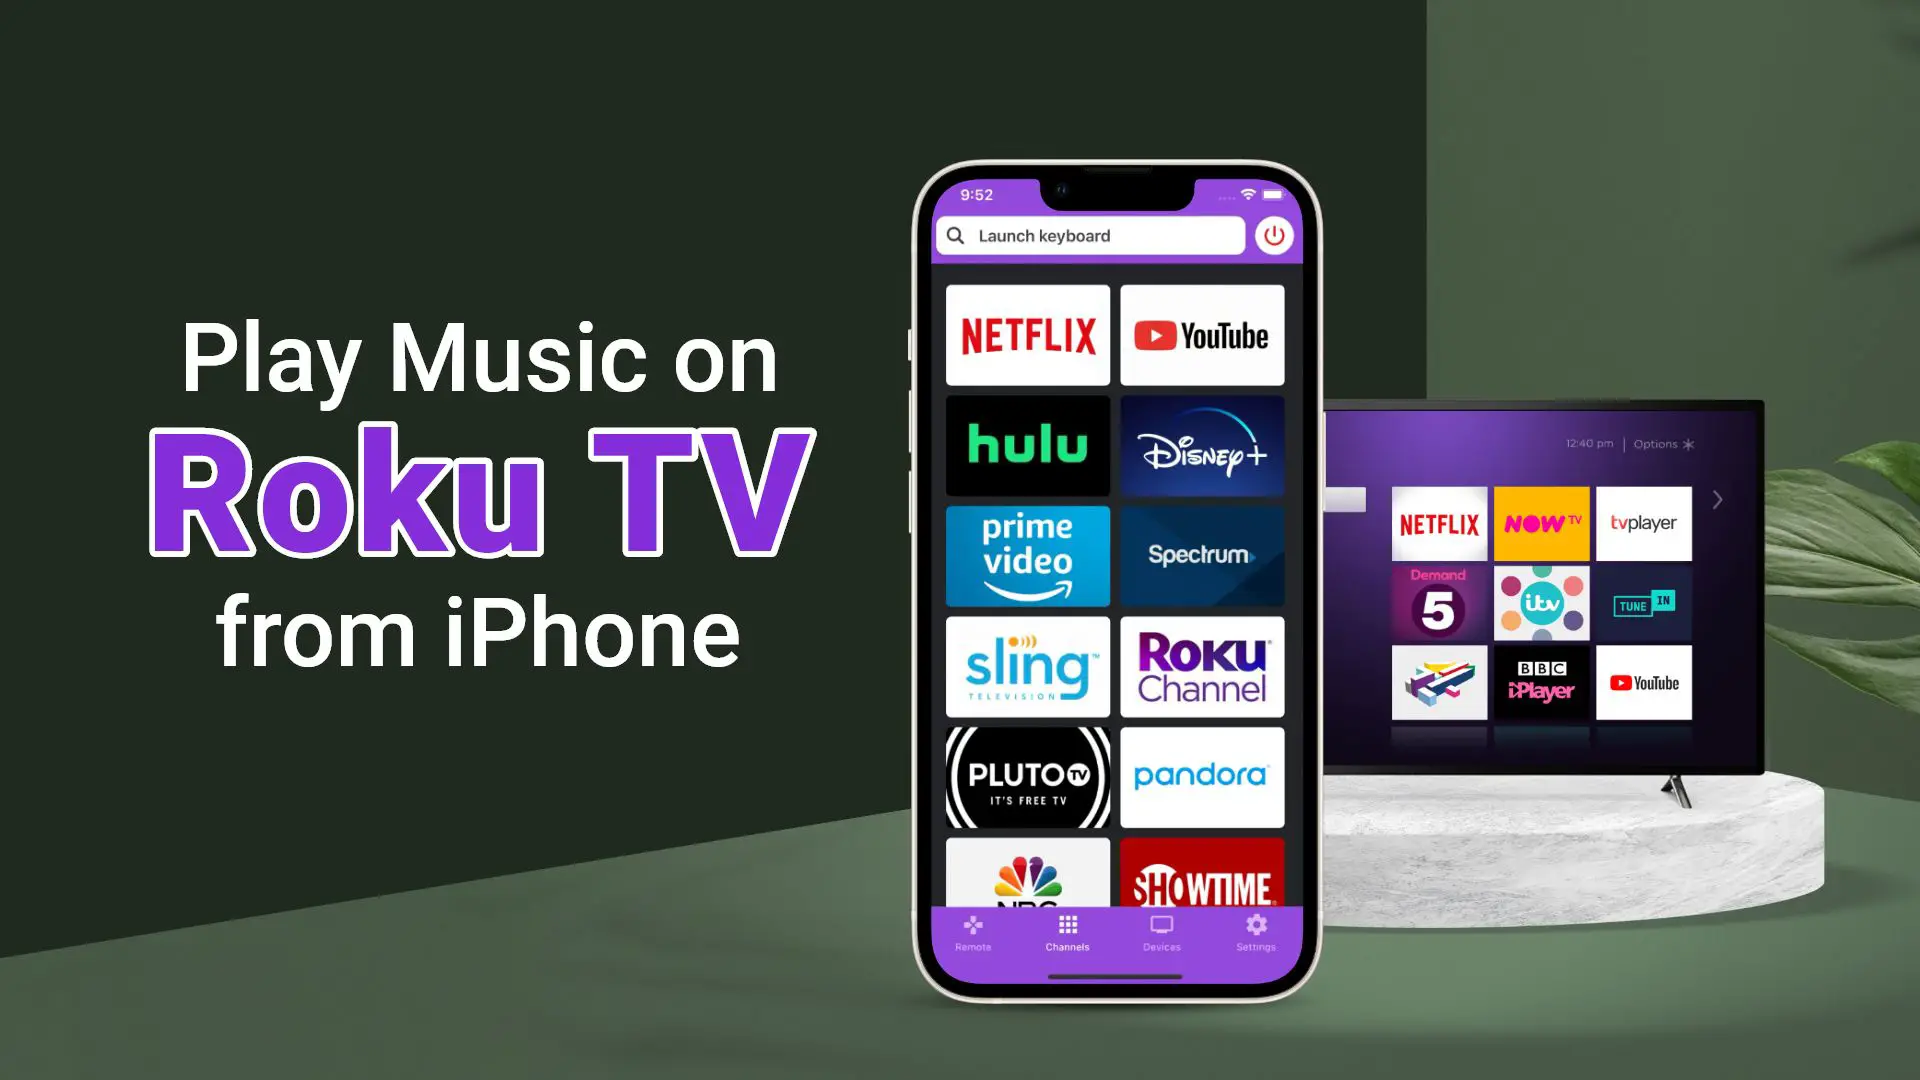 How to play music on Roku TV from iPhone